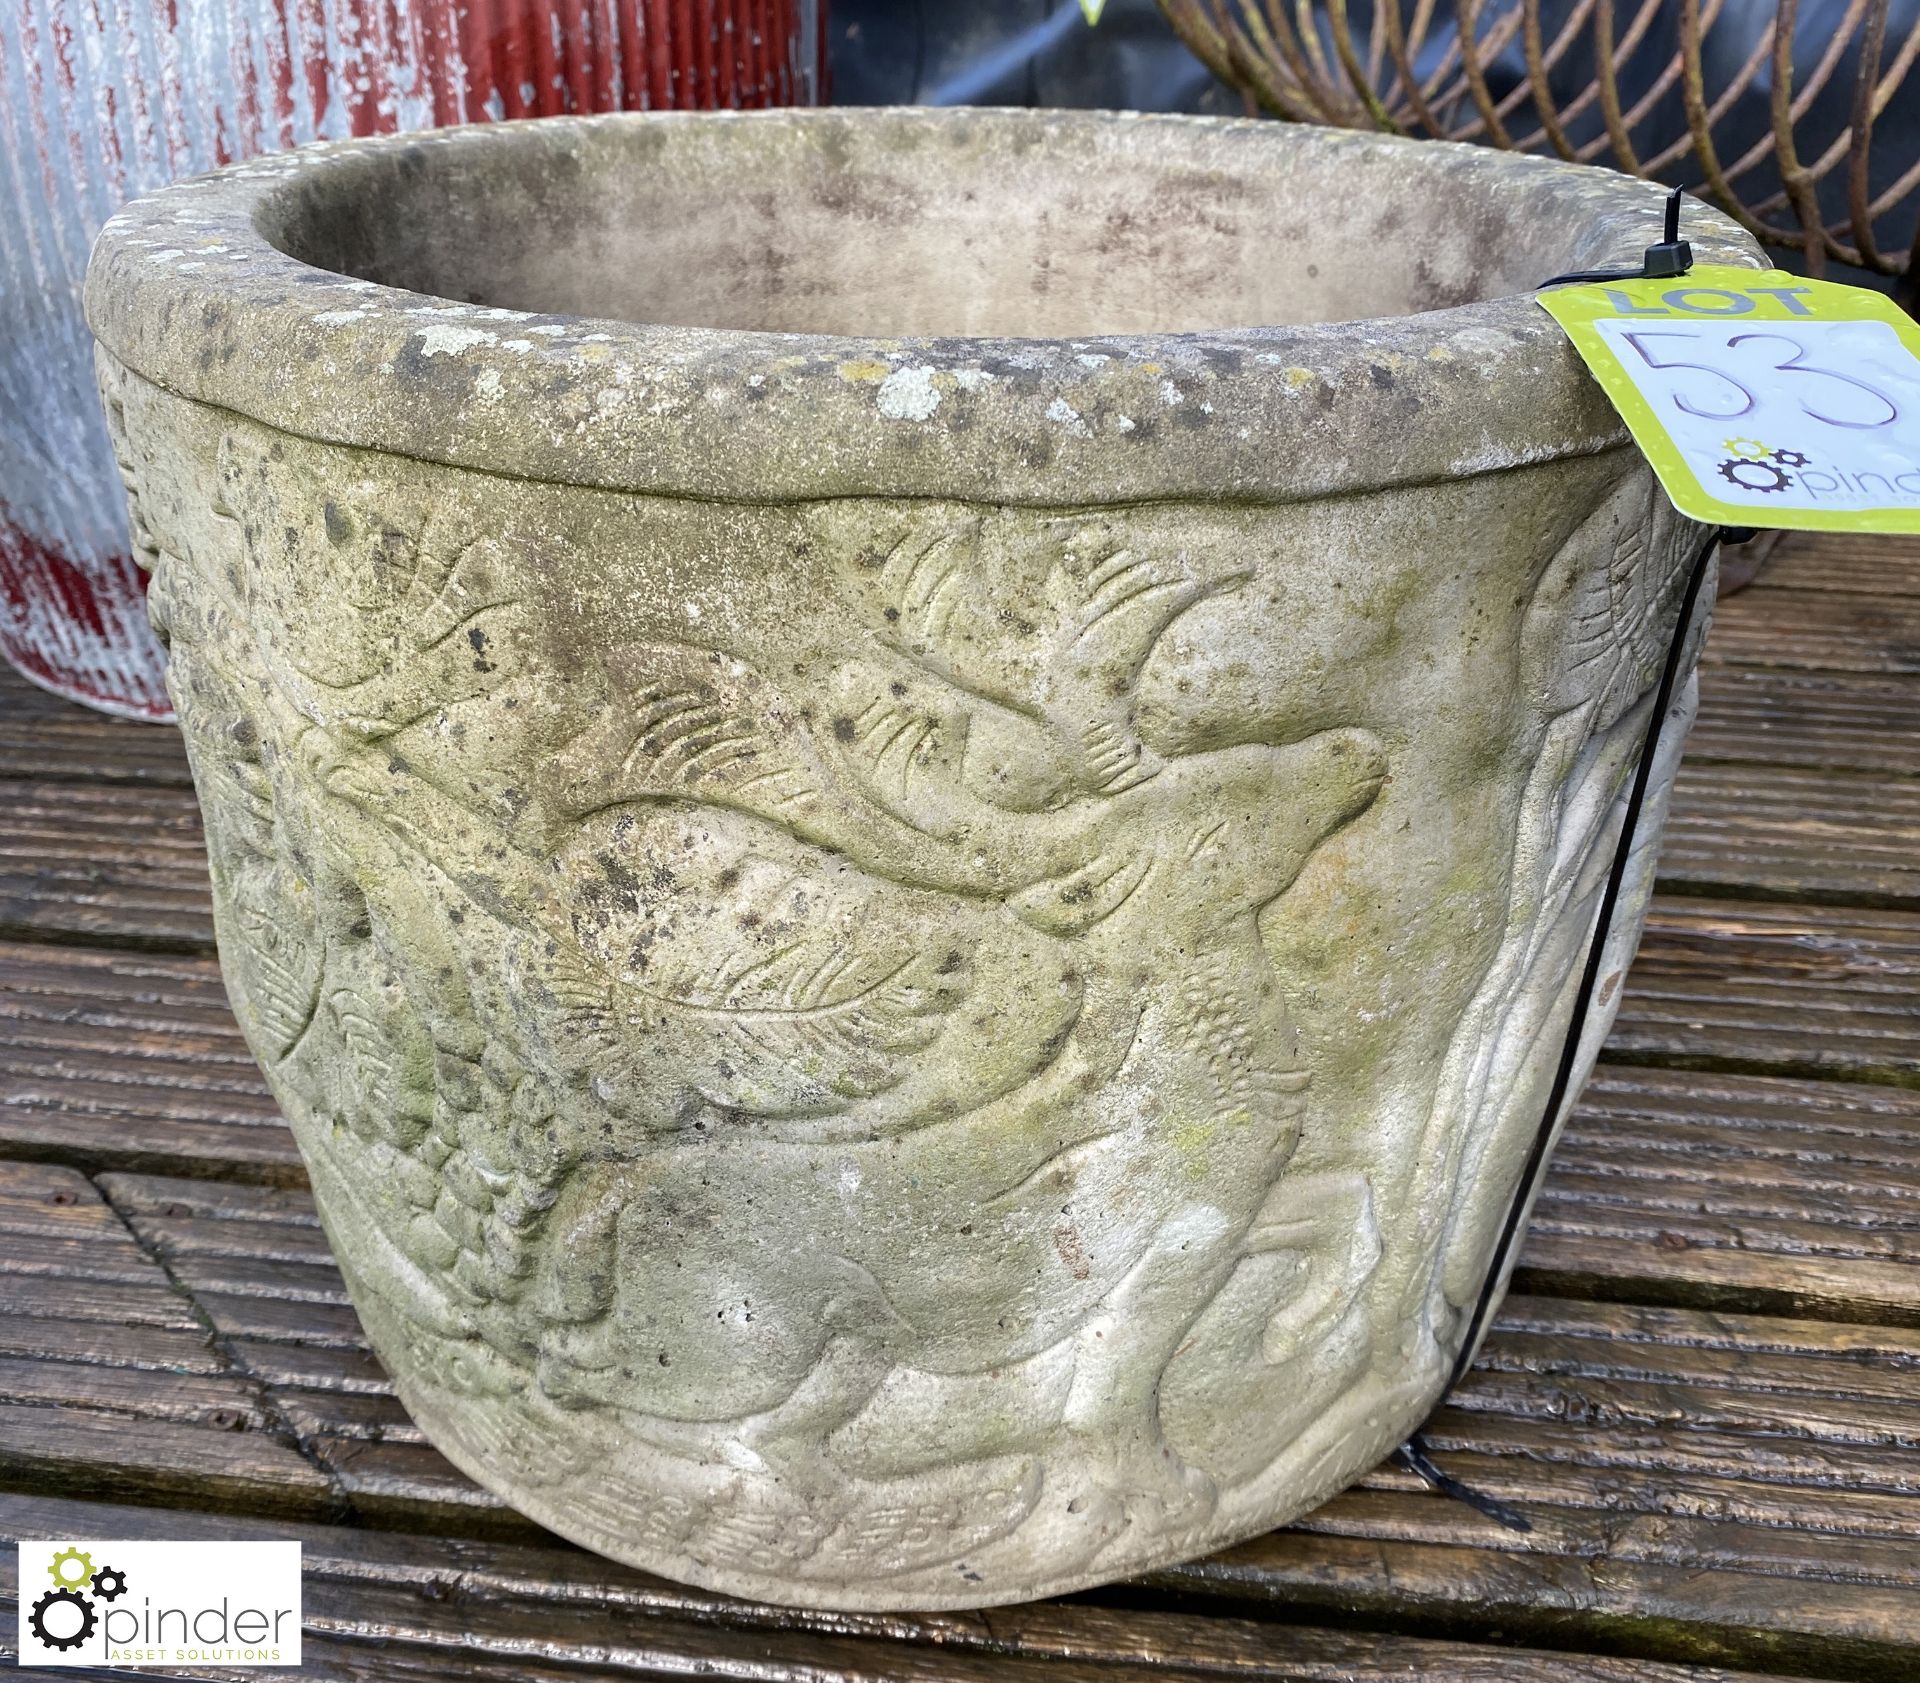 A reconstituted stone Planter, with mythical creat